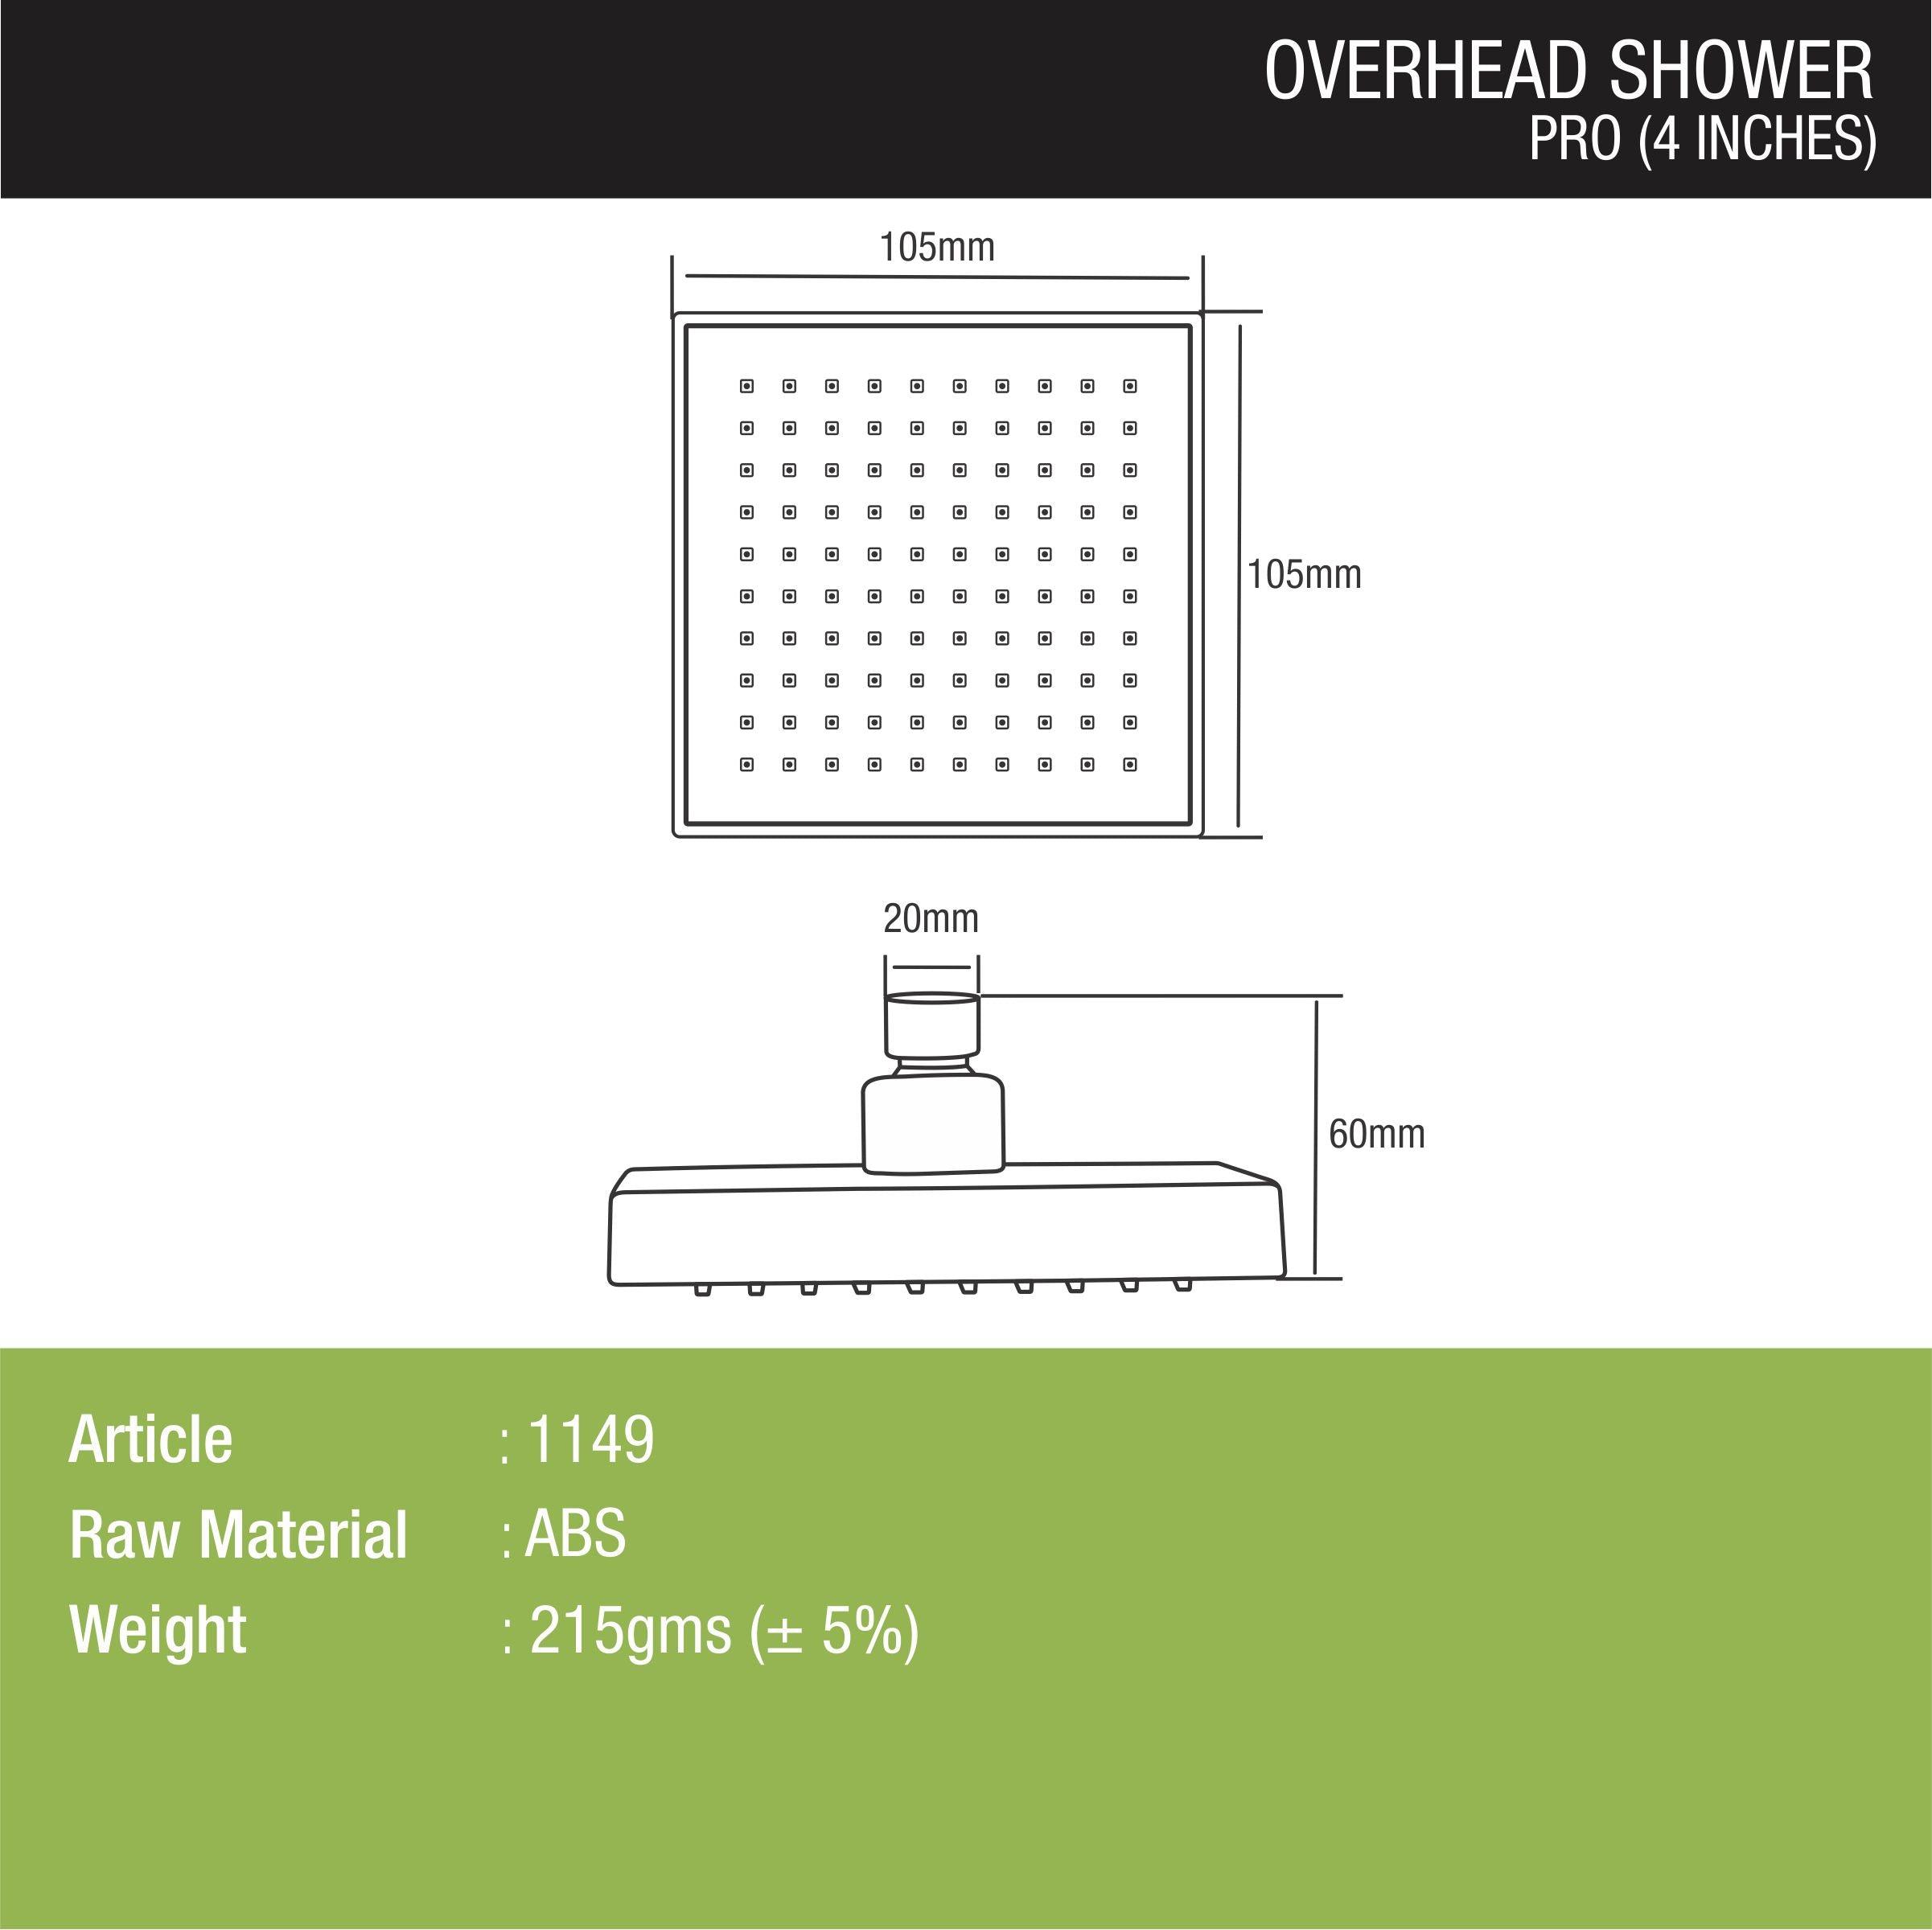 Pro Overhead Shower (4 x 4 Inches) dimensions and sizes